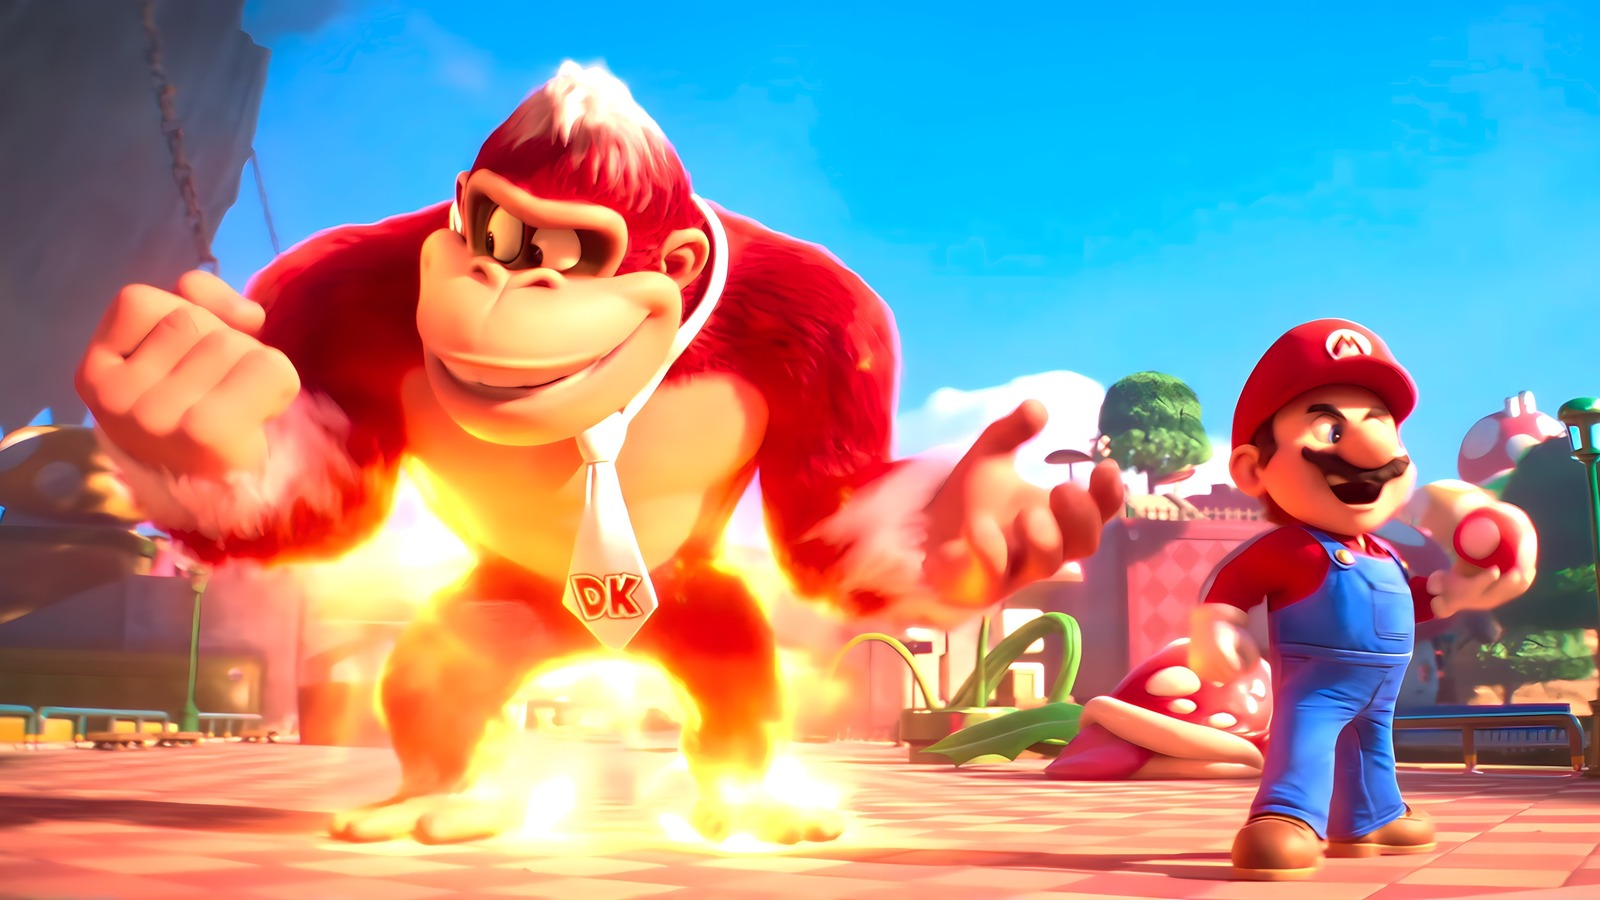 Who Plays Donkey Kong In The Super Mario Bros. Movie?